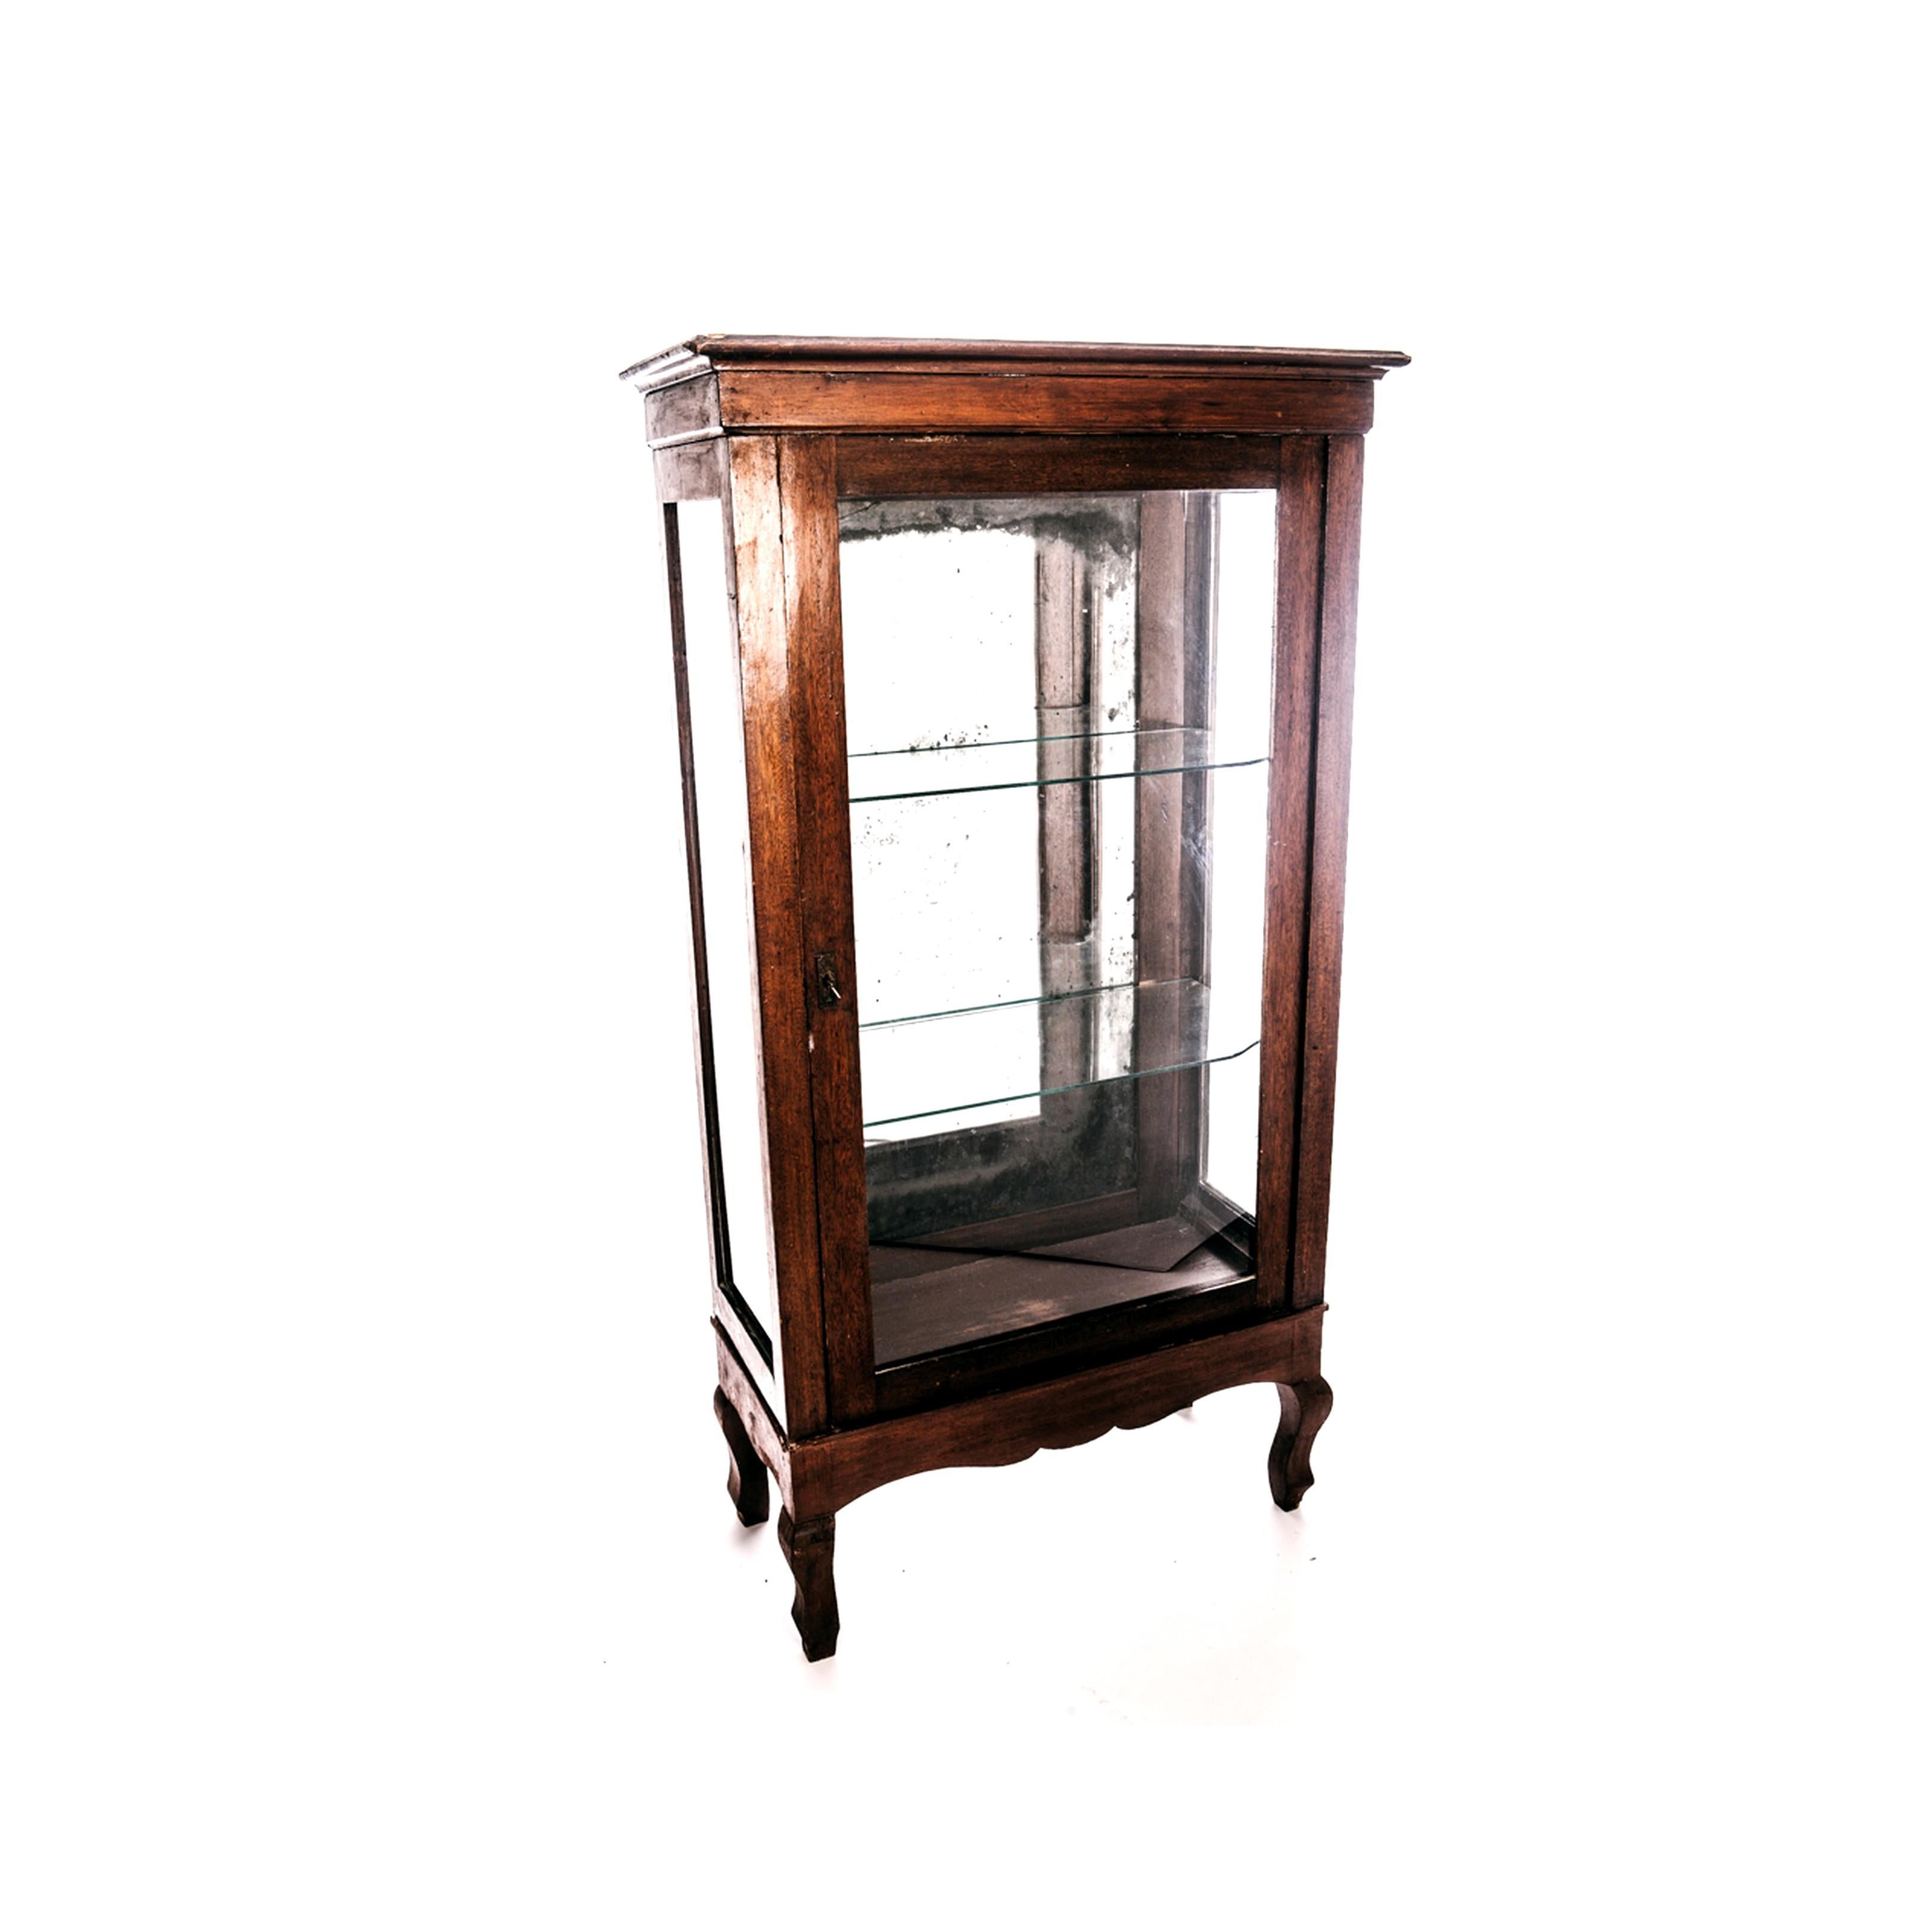 A highly rare, well-preserved piece made in Sweden 1830s with original back mirror and original glass shelves.

We have never seen anything like this!